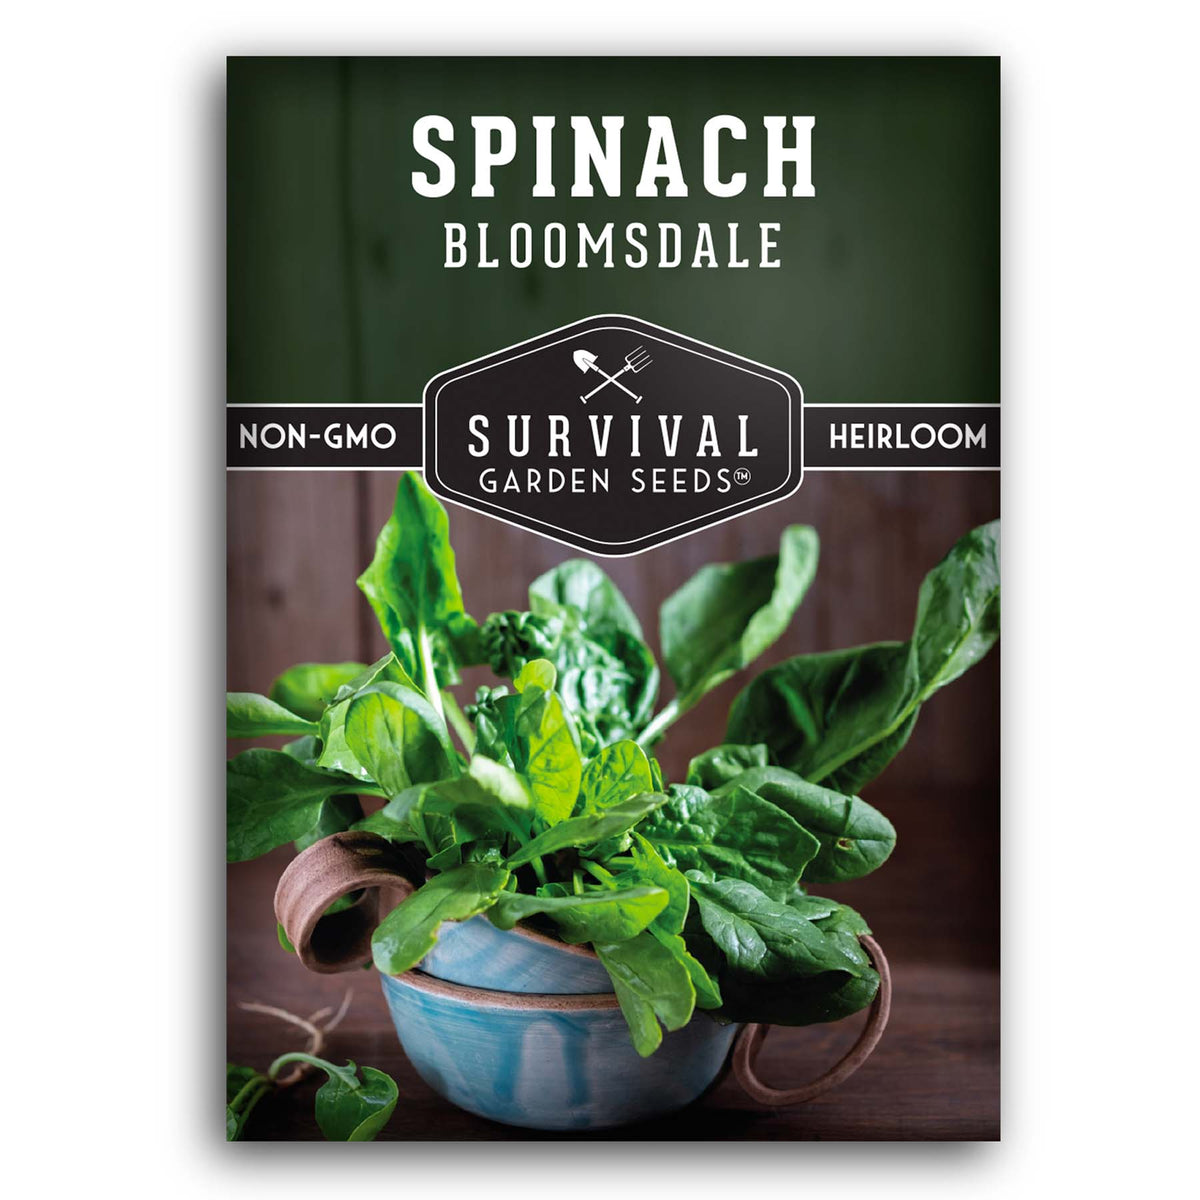 Bloomsdale Spinach seeds for planting